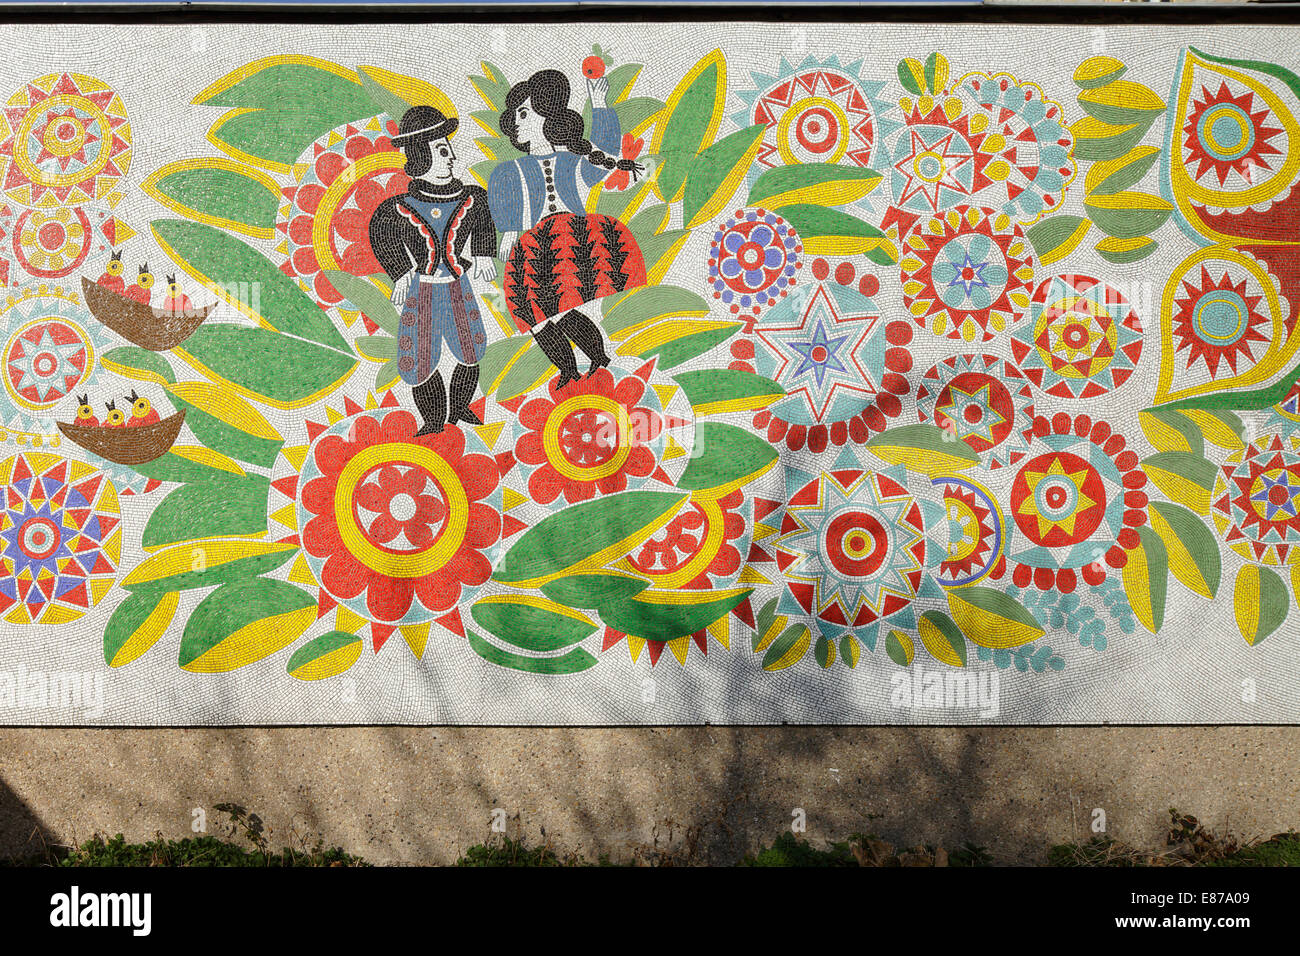 Berlin, Germany, mosaic with a dancing couple and floral motifs in the Eastern European style Stock Photo